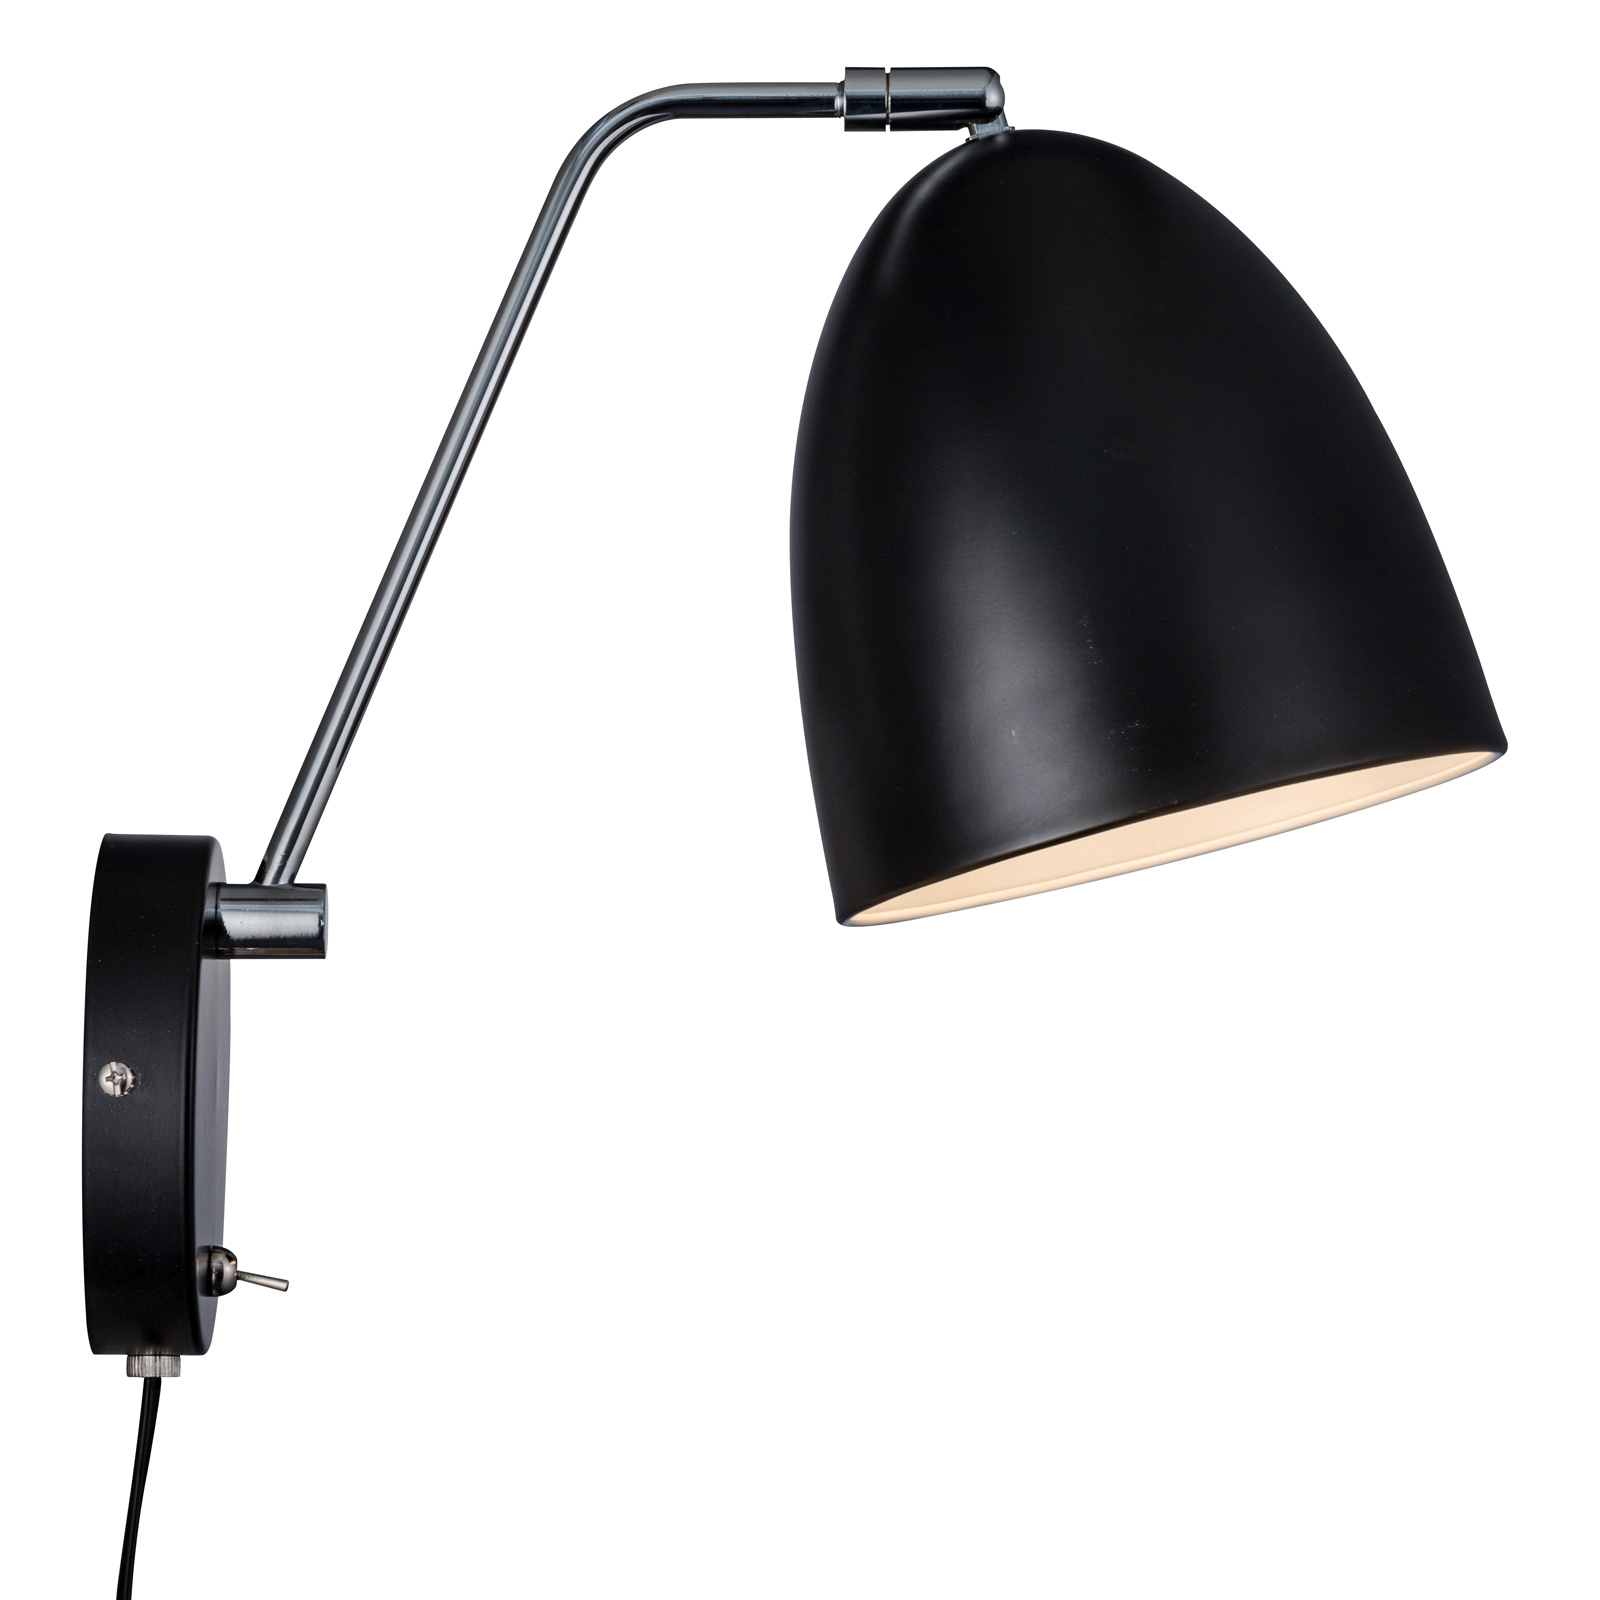 Alexander wall lamp with cable and plug, black